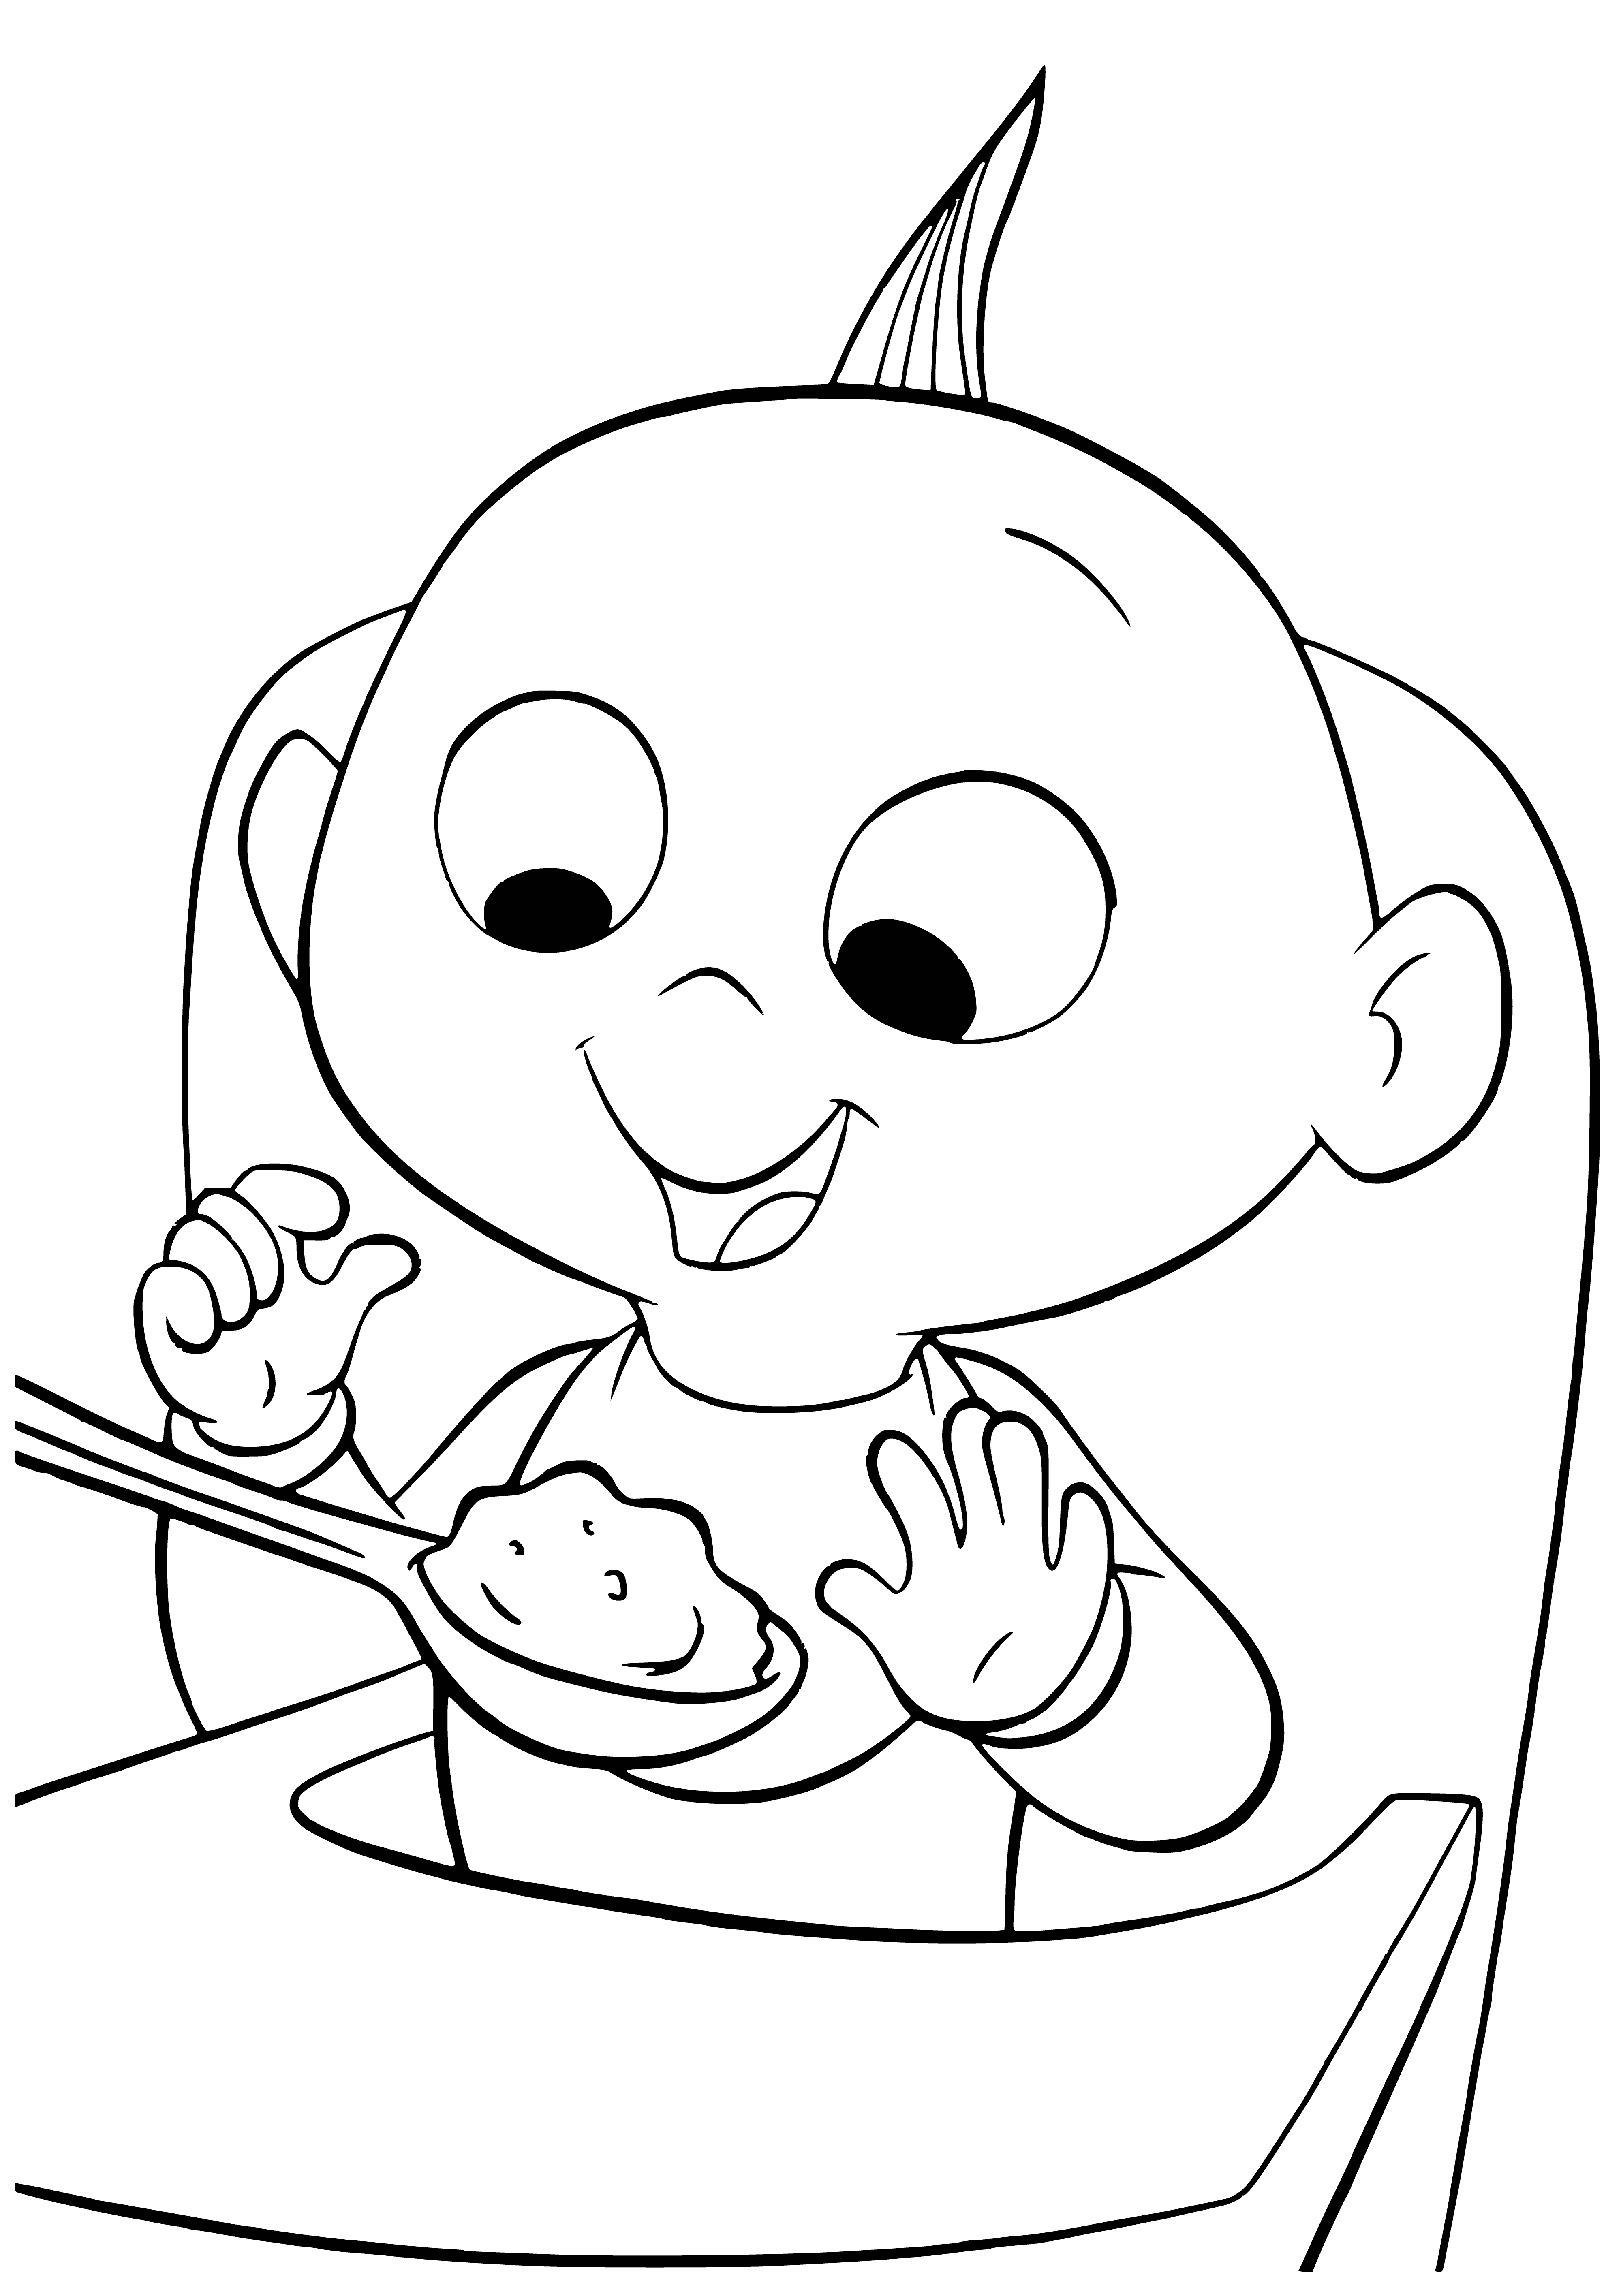 Jay-Jack coloring page